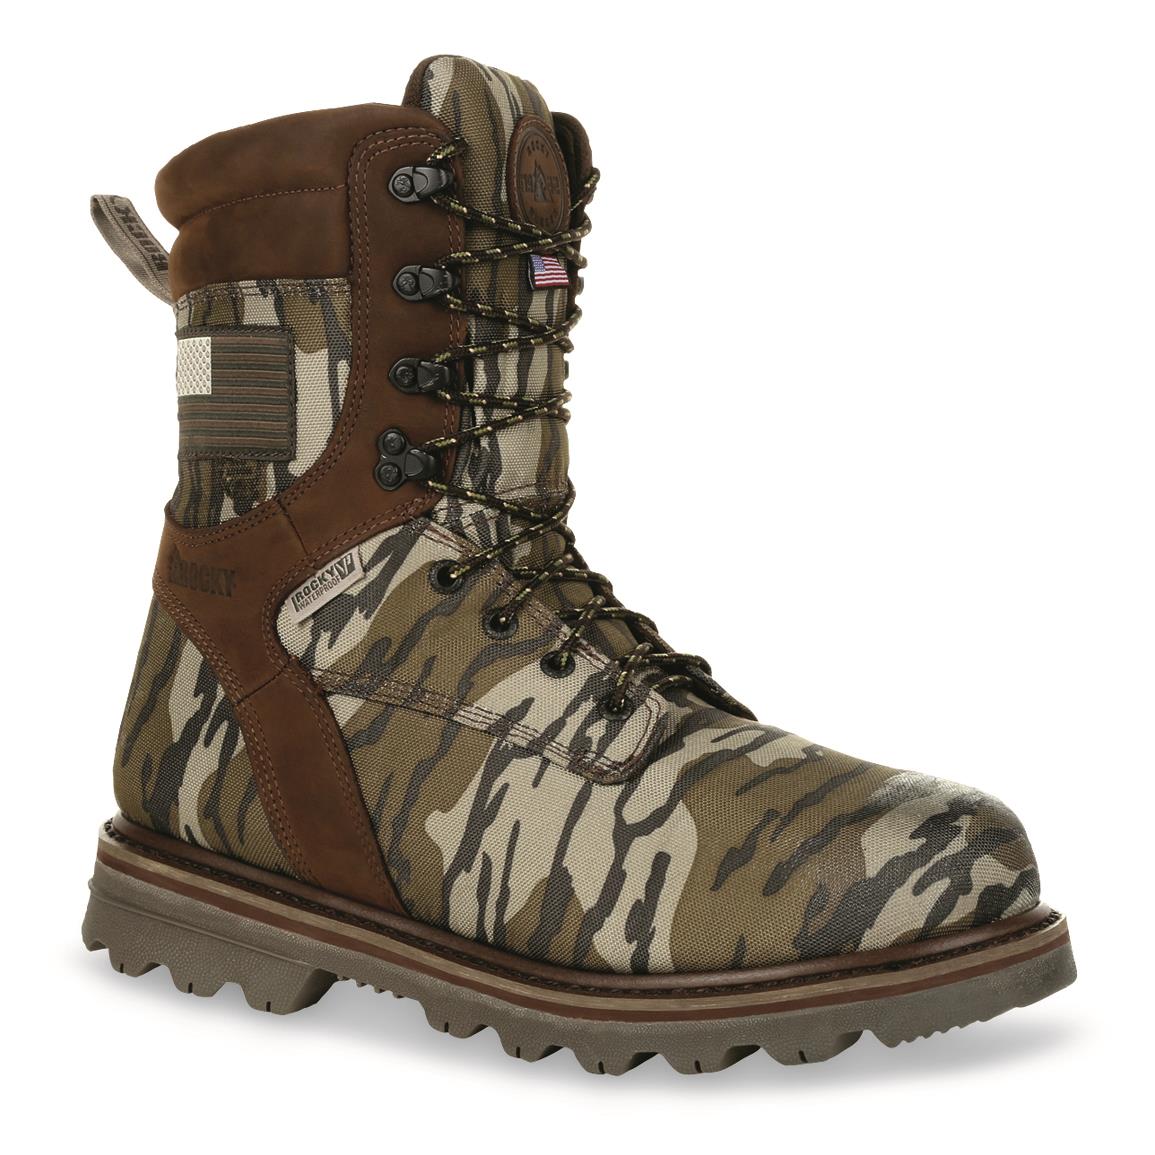 900-denier CORDURA® uppers with leather accents, Mossy Oak Bottomland®